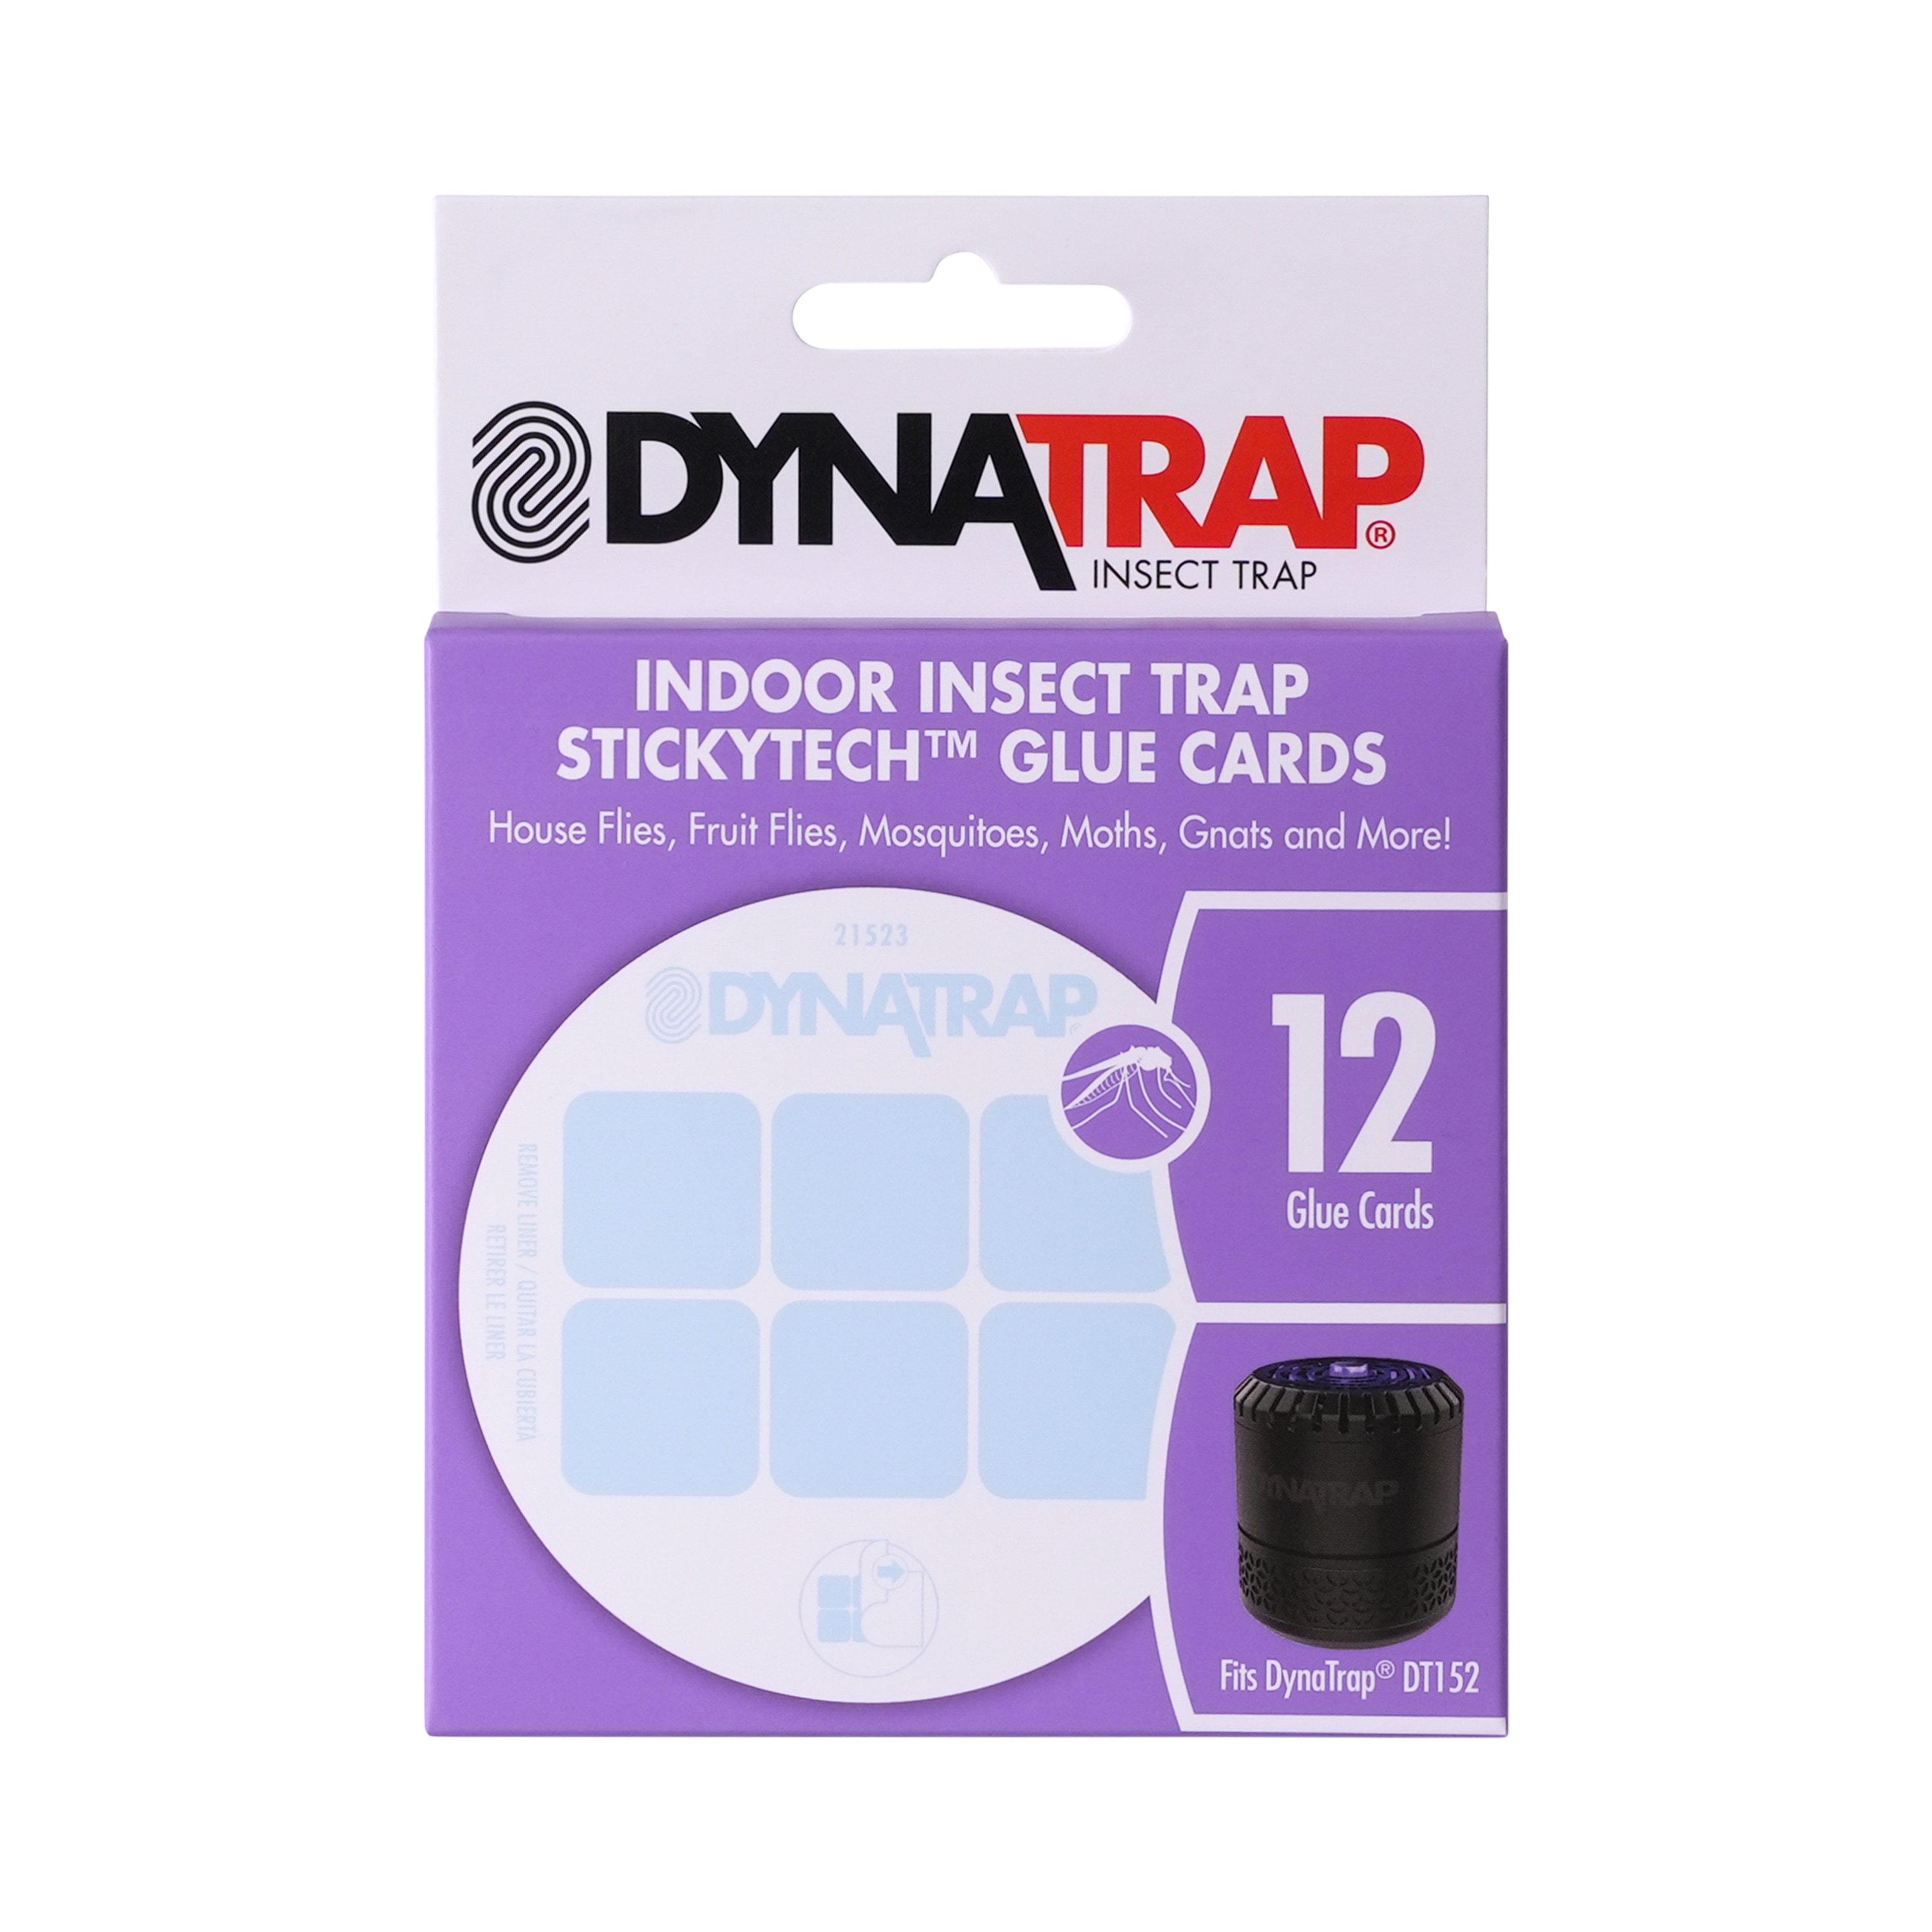  DynaTrap DT152 Indoor Insect Trap and Killer – Catches and  Kills Fruit Flies, Gnats, Moths, Mosquitoes & Other Flying Insects : Patio,  Lawn & Garden